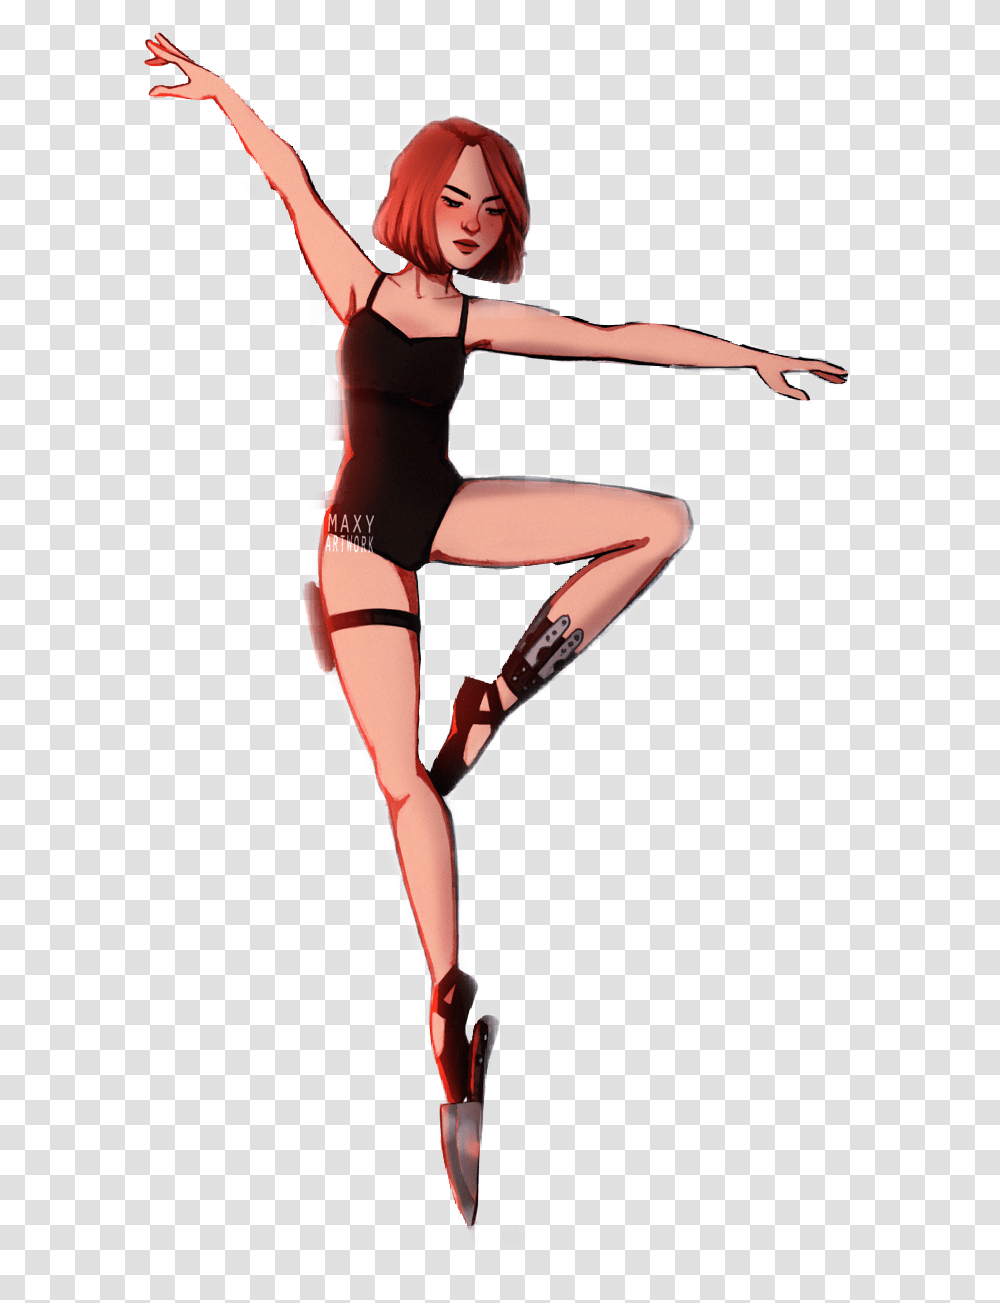 I Do Not Claim This Artwork As My Own If You Would Natasha Romanoff Fan Art, Dance Pose, Leisure Activities, Person, Performer Transparent Png